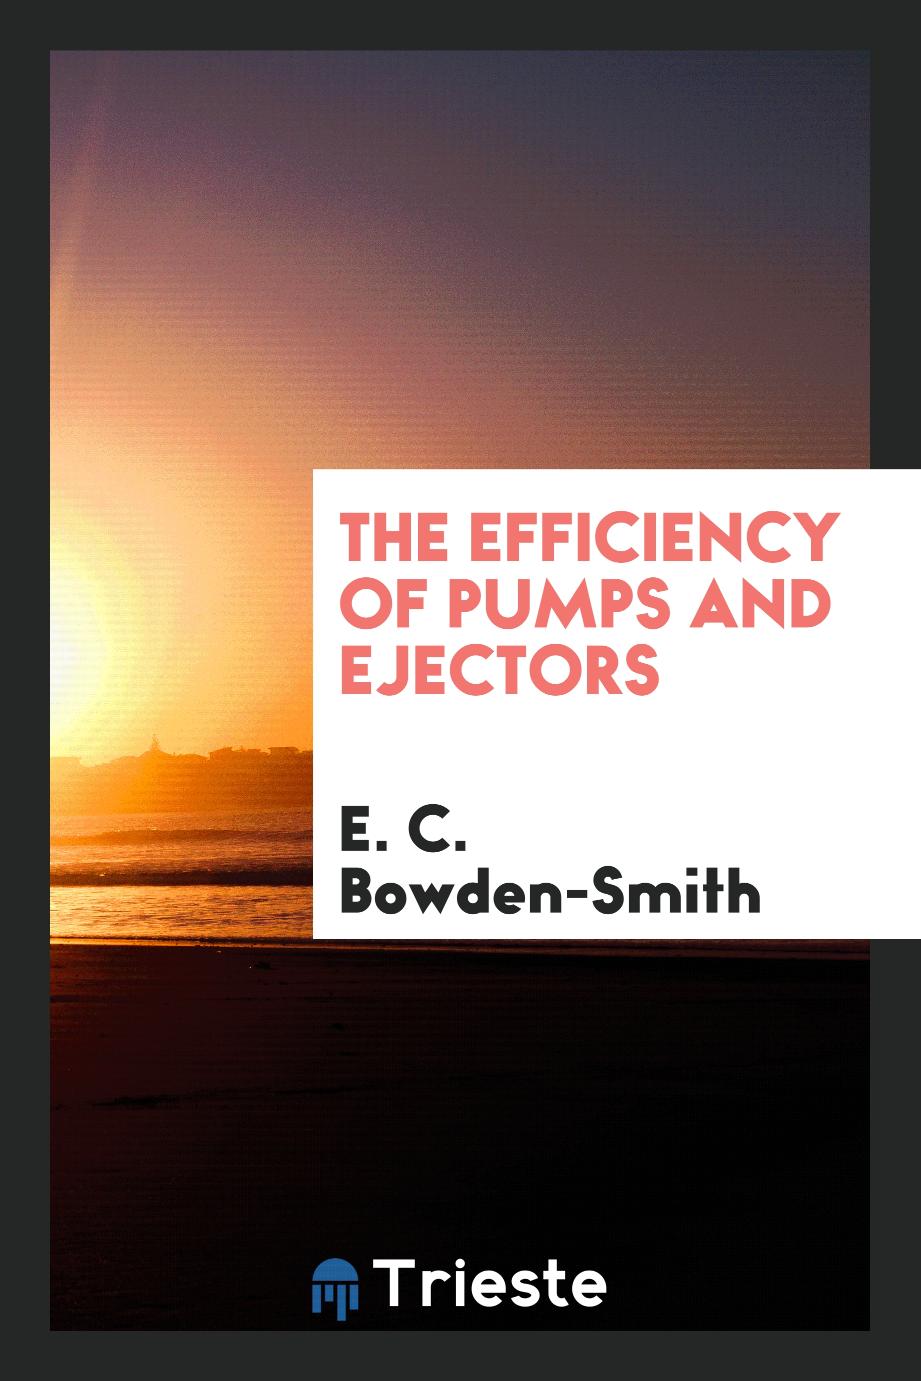 E. C. Bowden-Smith - The Efficiency of Pumps and Ejectors